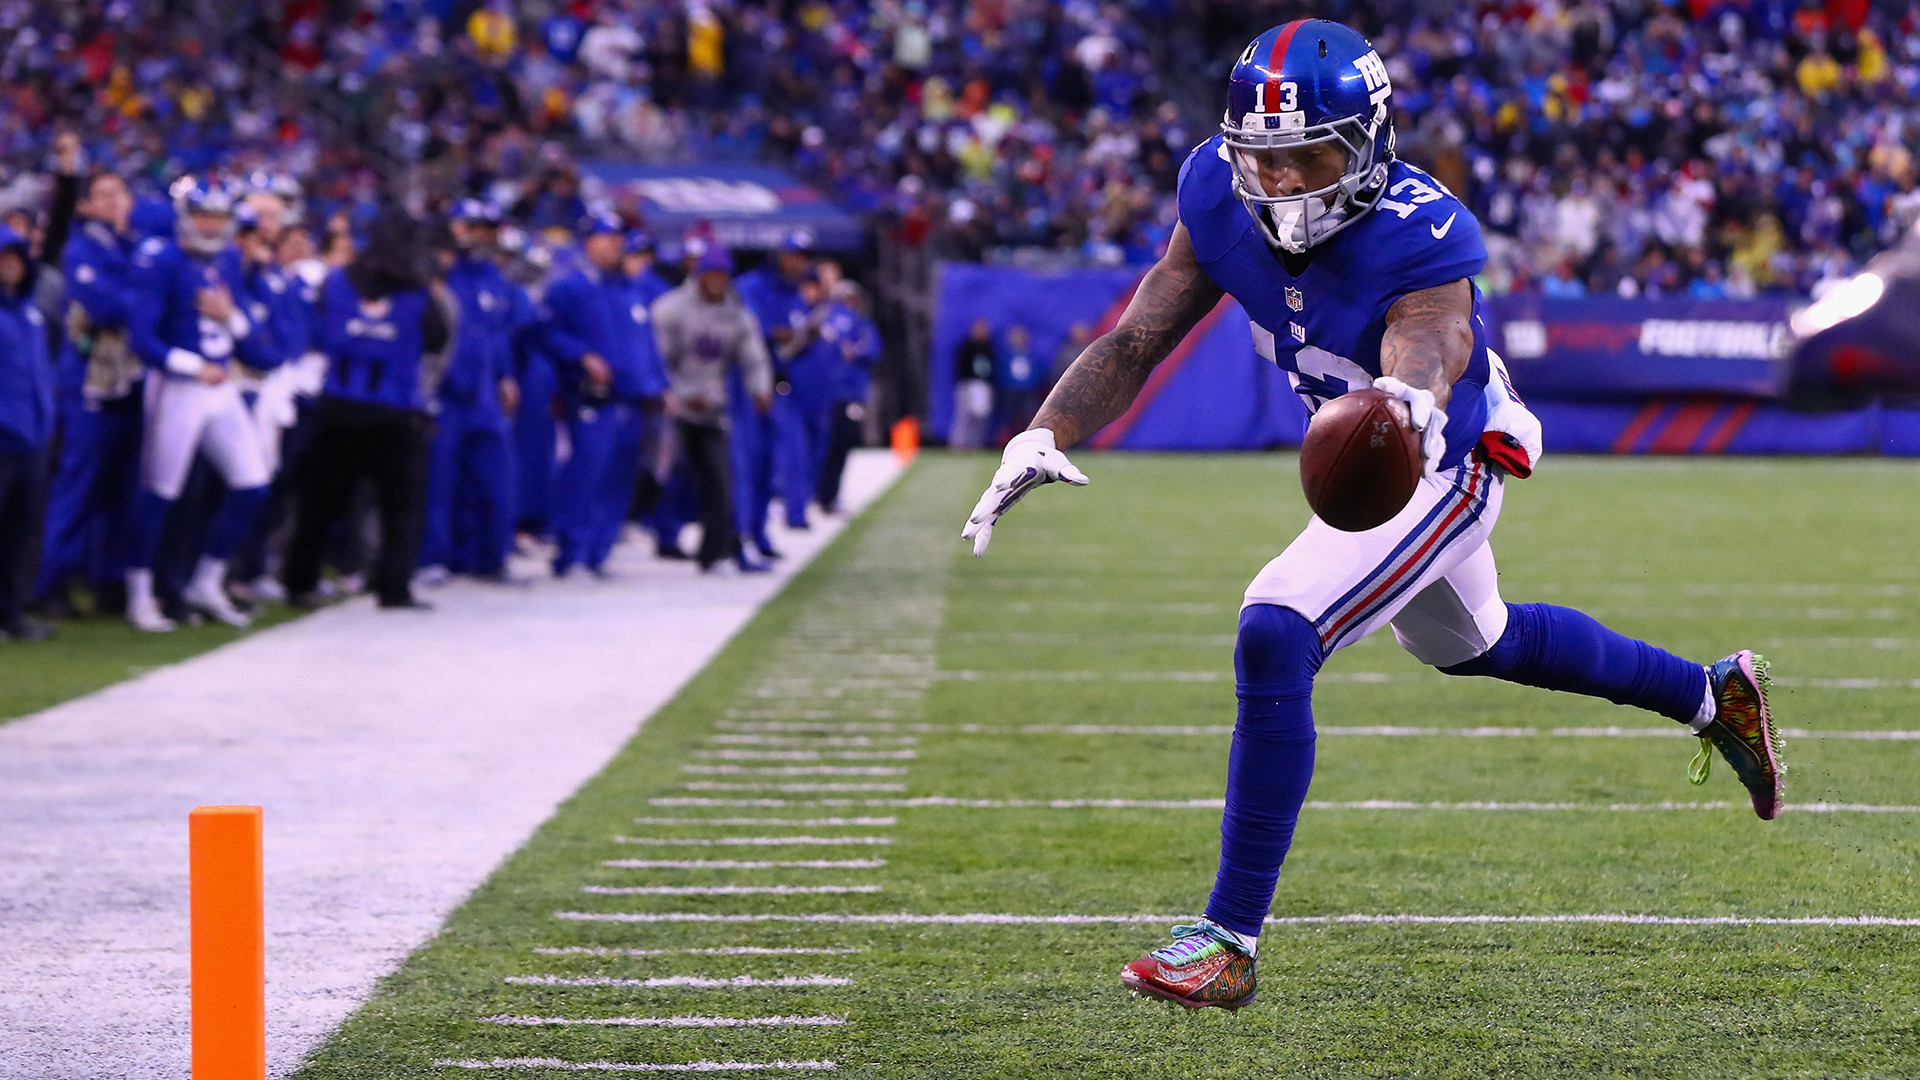 Odell Beckham Jr. pulled off another great one-handed catch to lead to his